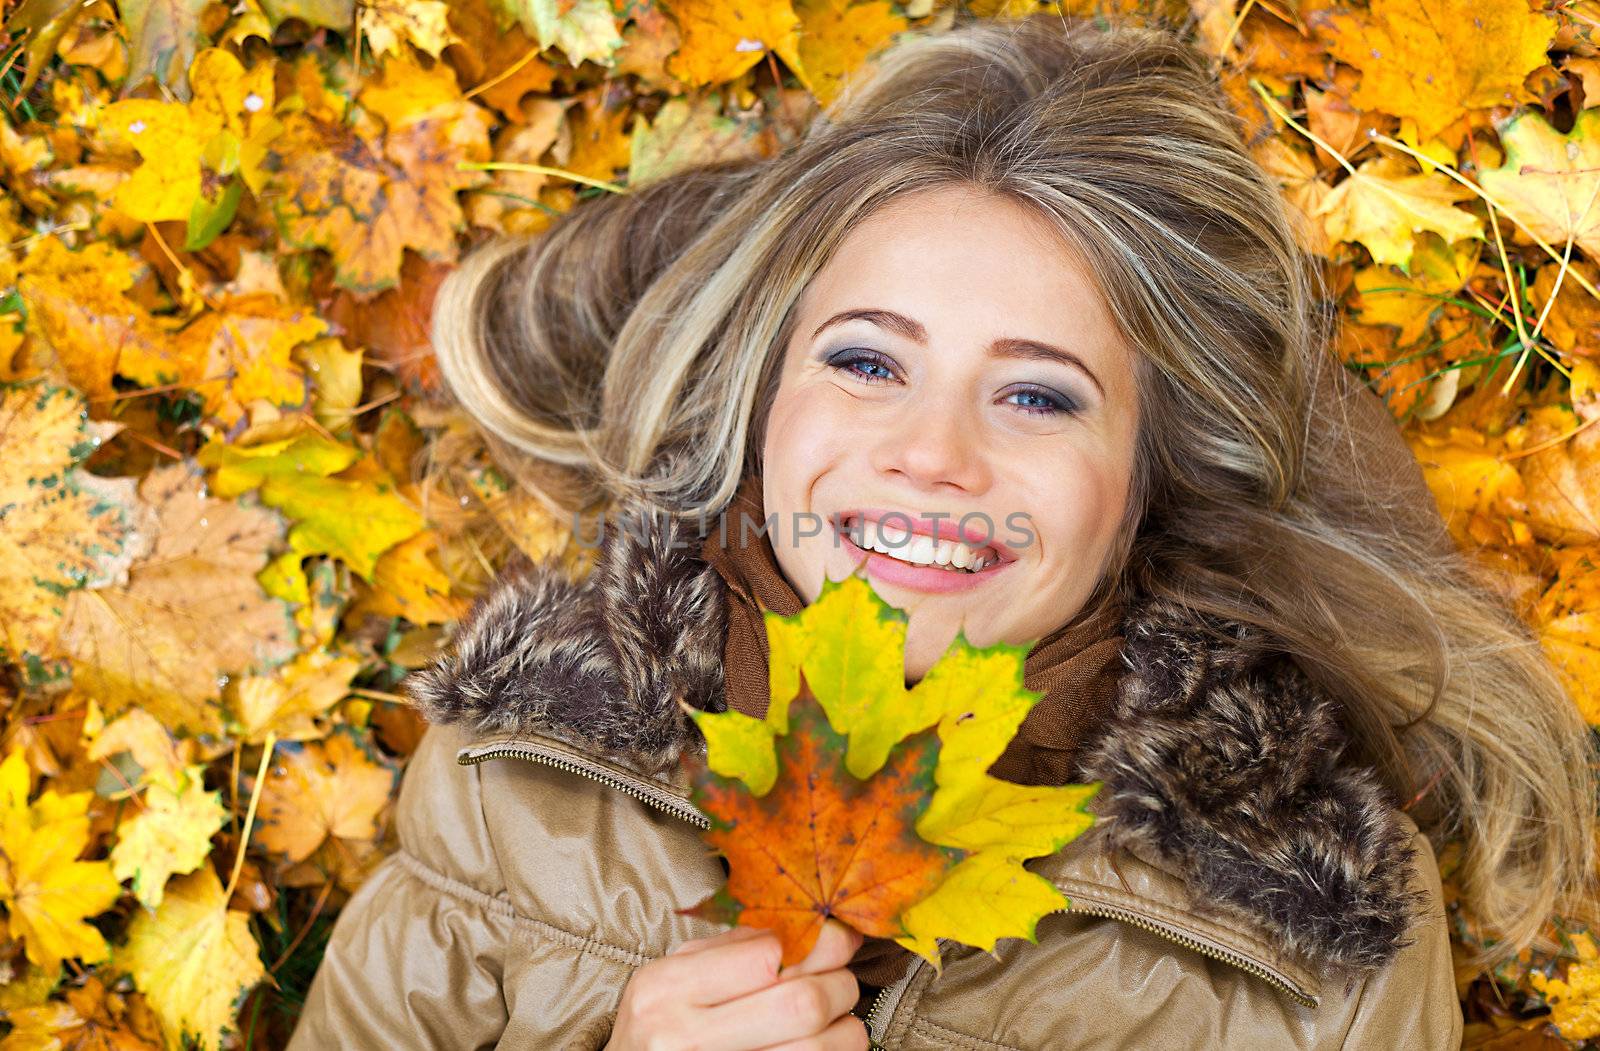 Closeup portrait of a young woman surrounded by autumn leaves